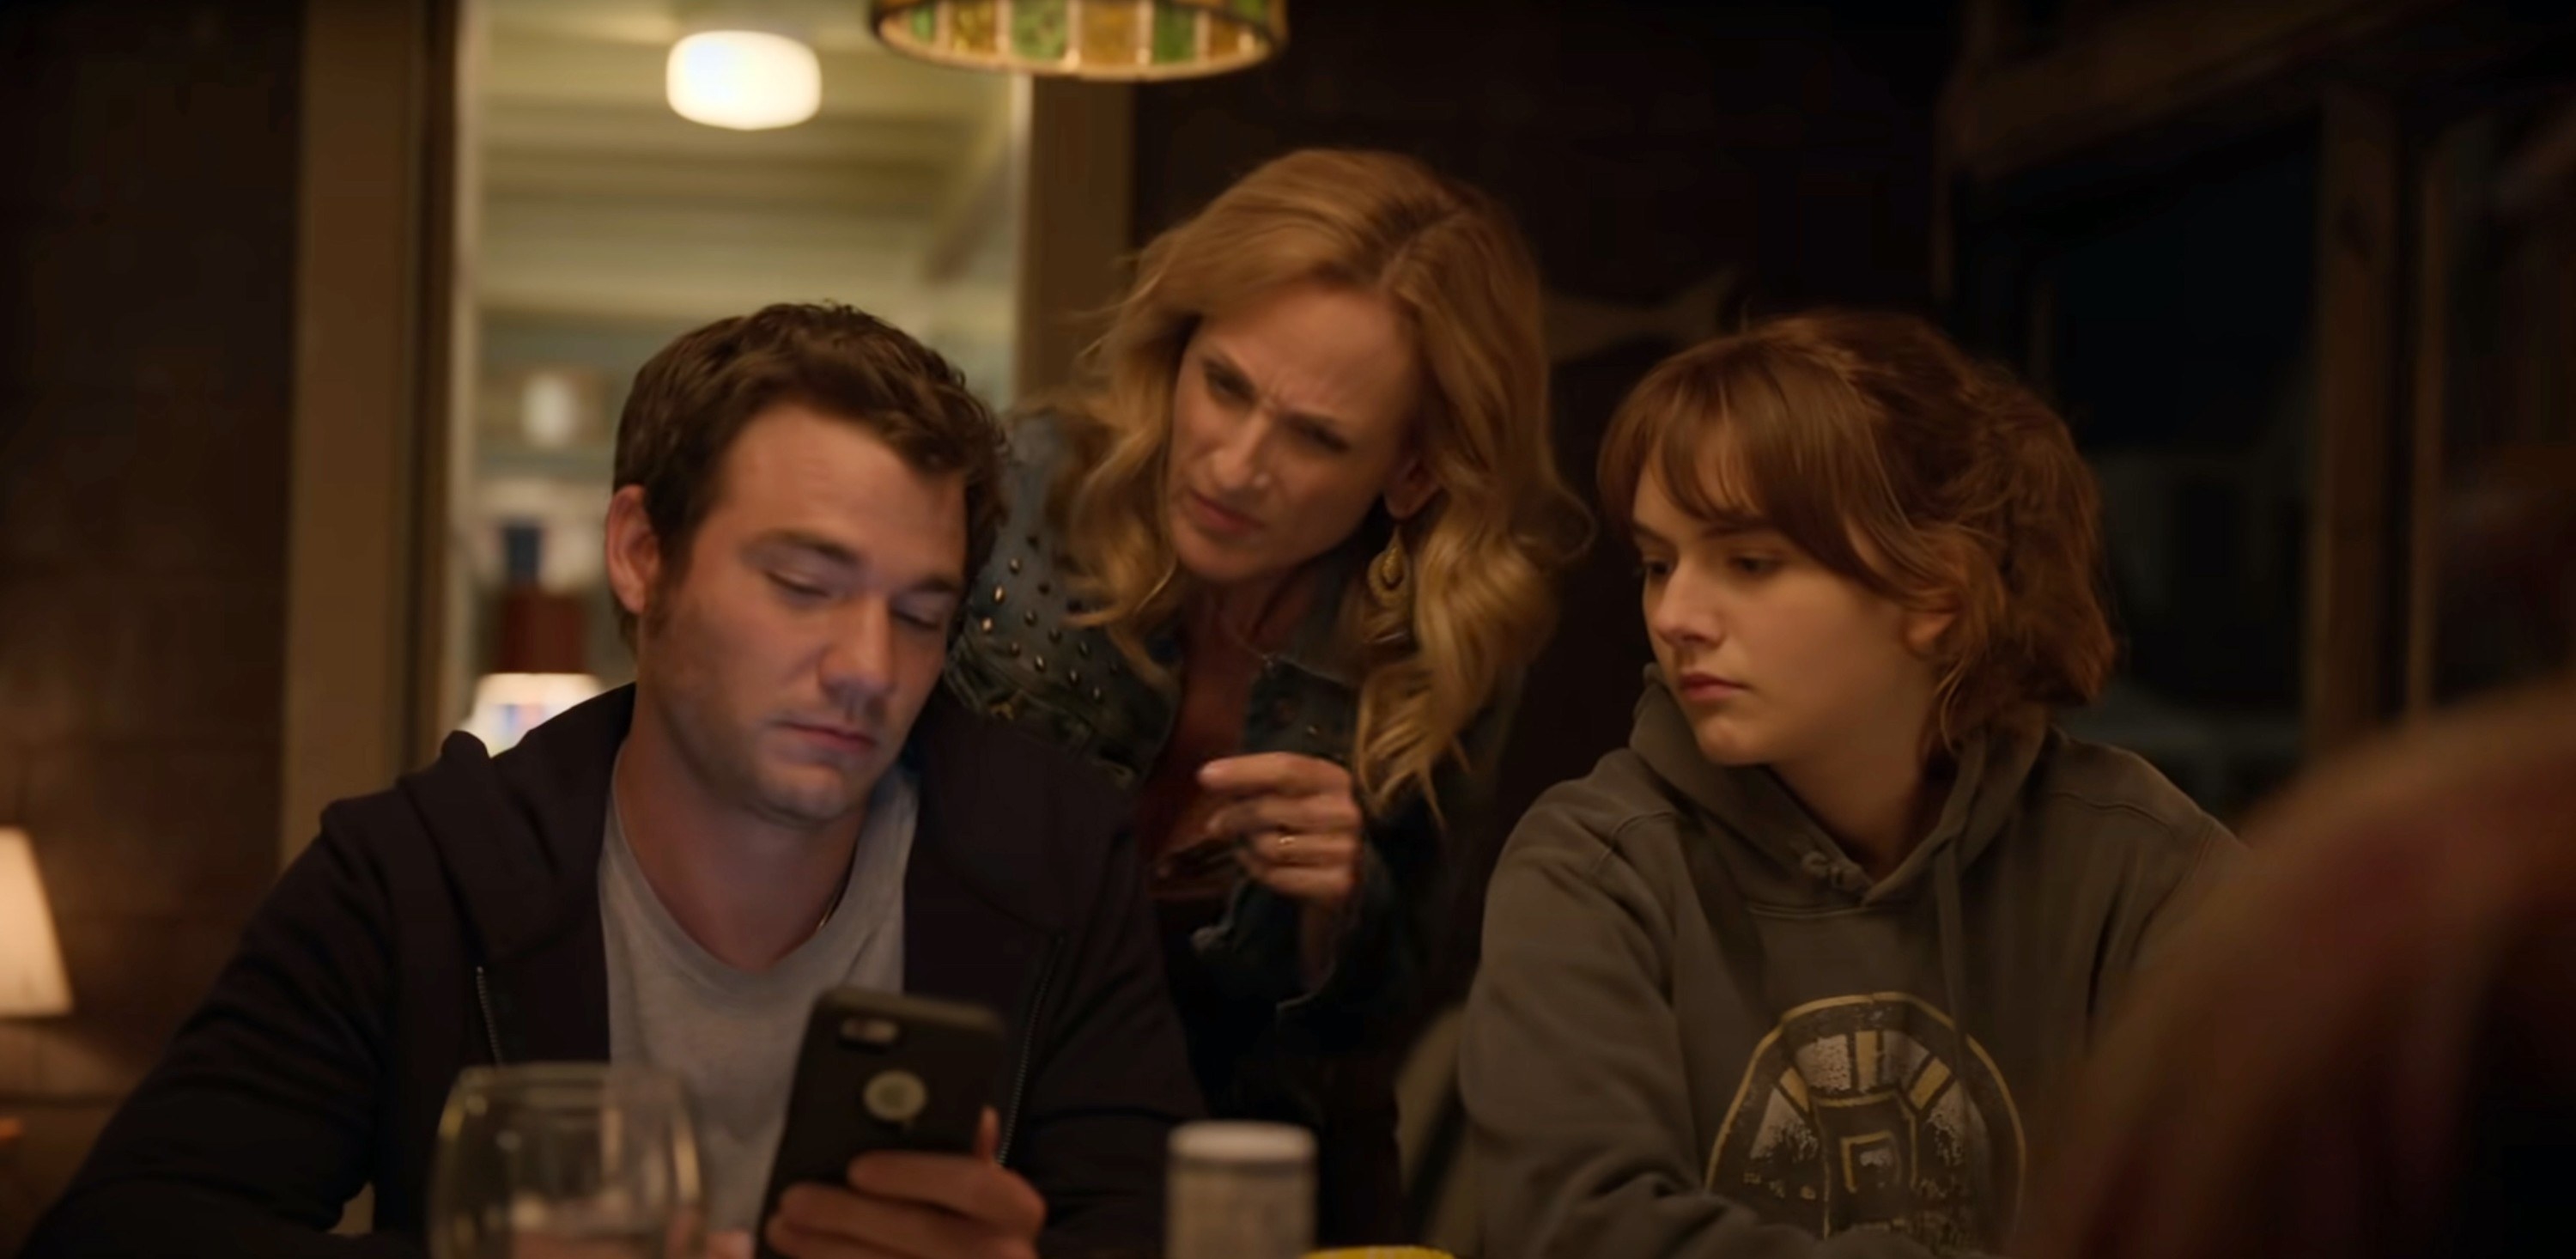 Daniel Durant, Marlee Matlin, and Emilia Jones look together at a phone at the dinner table